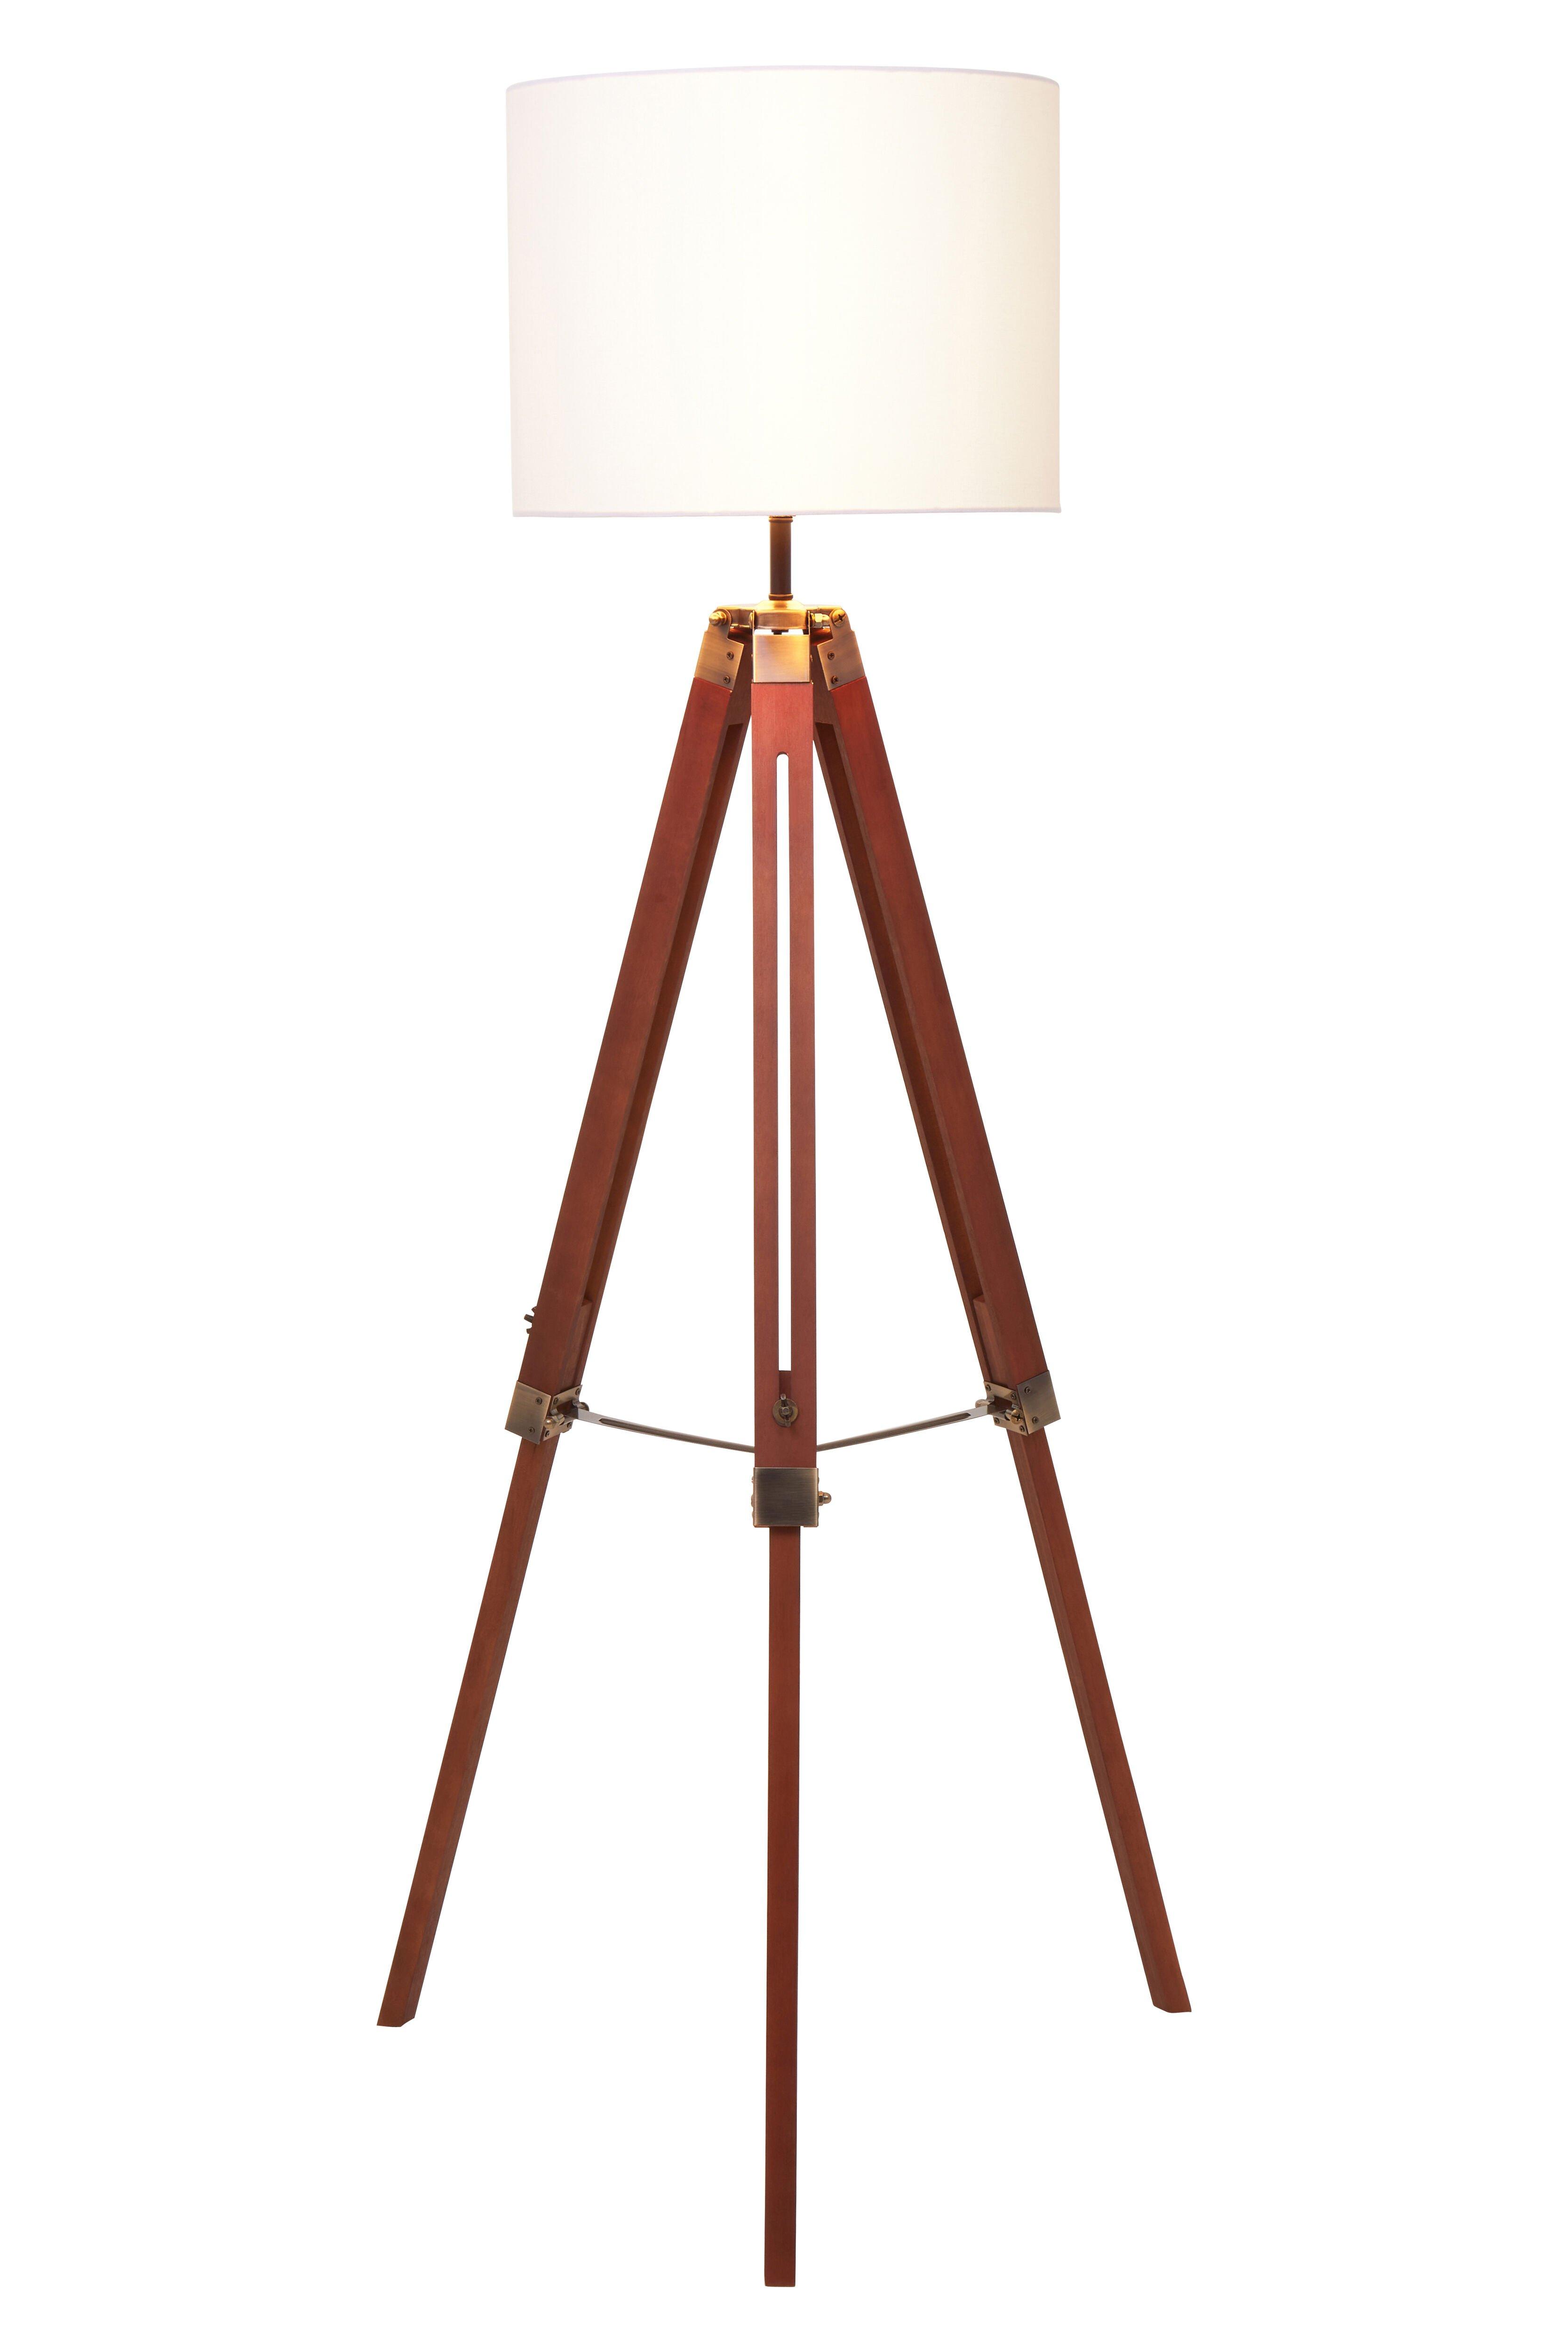 Interiors by Premier Malvern Tripod Floor Lamp With Brown Base